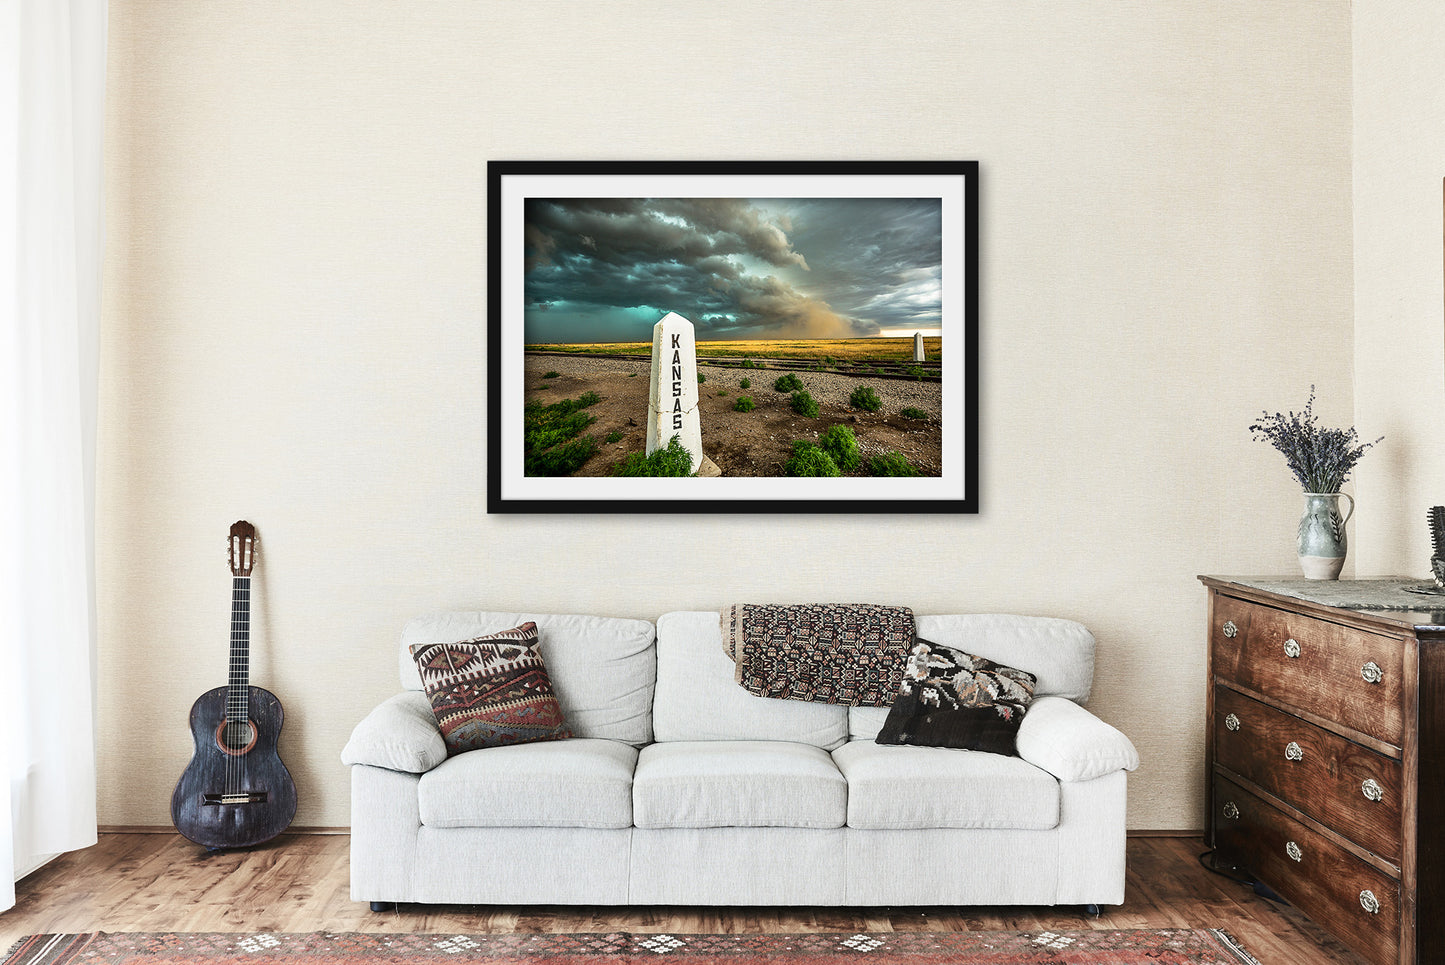 Framed Great Plains Print with Optional Mat (Ready to Hang) Picture of Thunderstorm Advancing Past Railroad Post at Kansas and Colorado State Line Storm Wall Art Western Decor